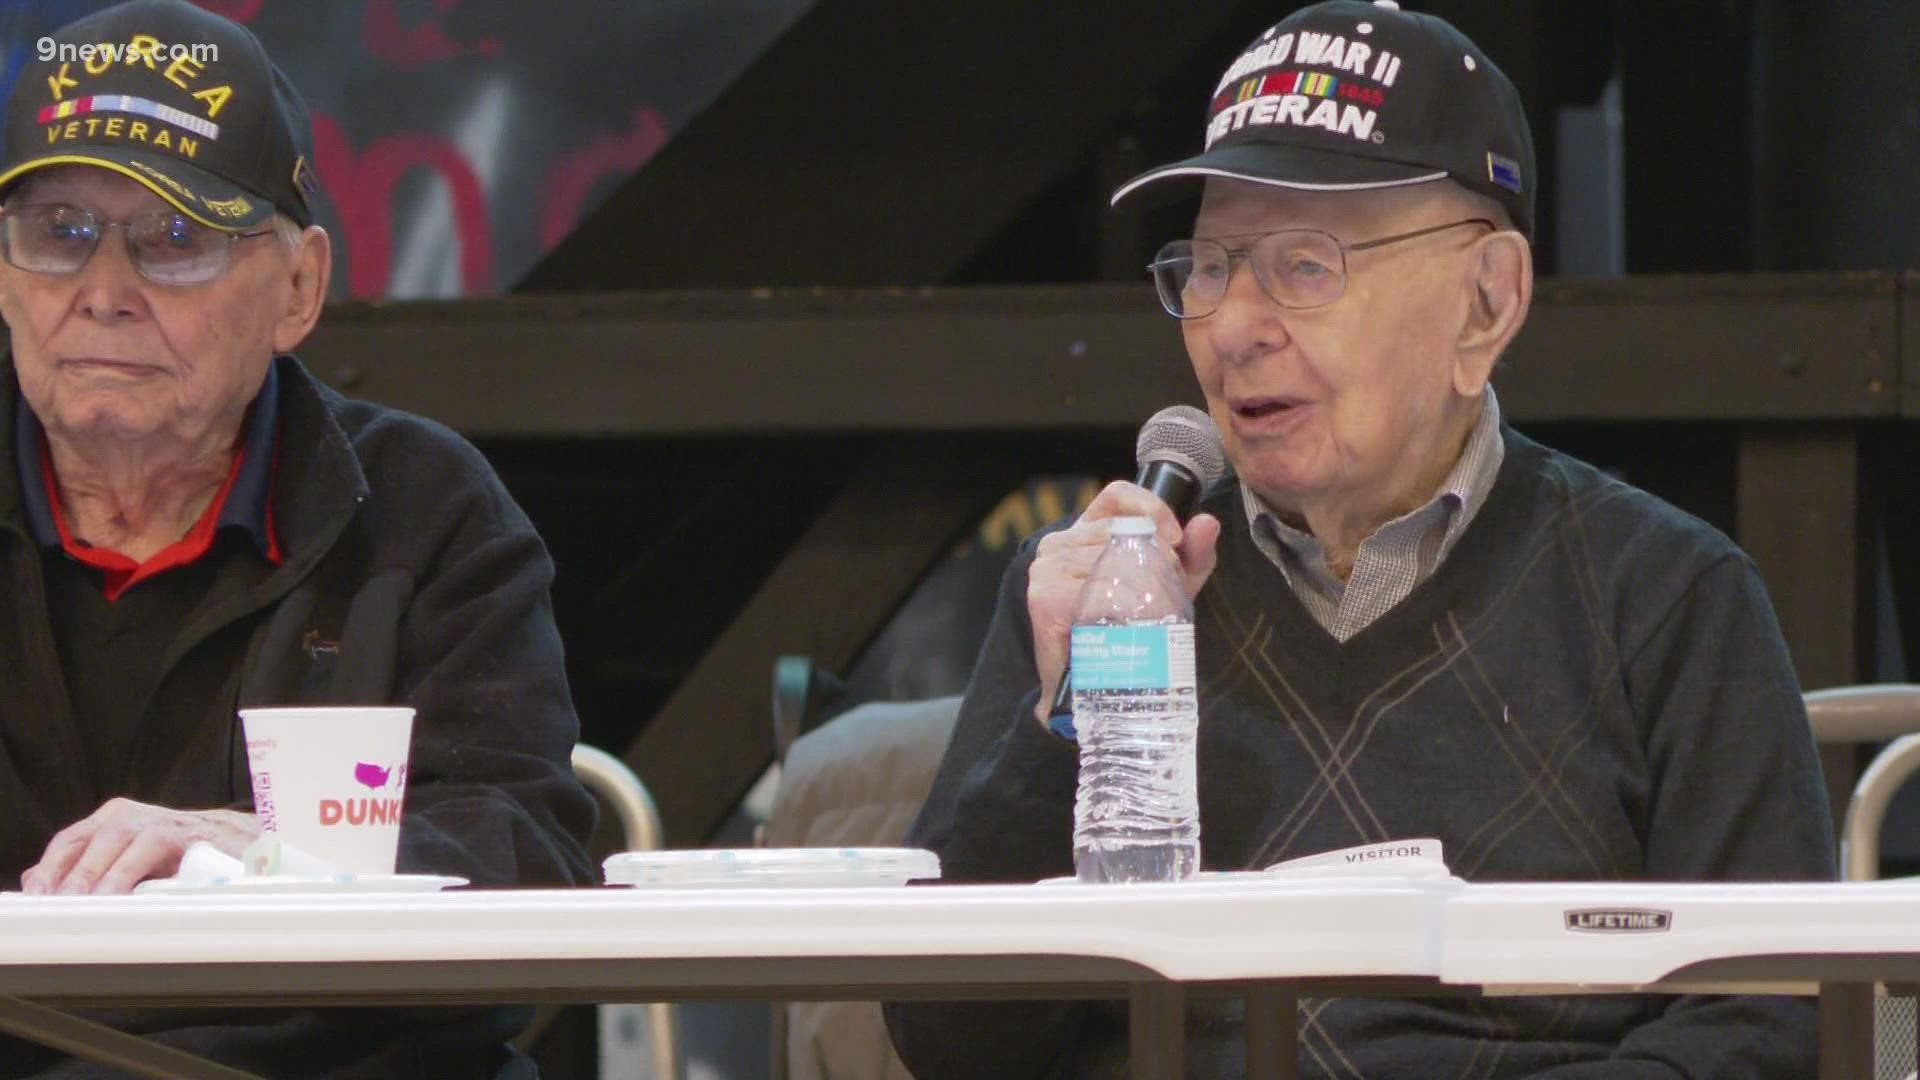 World War II veterans and others shared their living history with students at Denver South High School Tuesday.